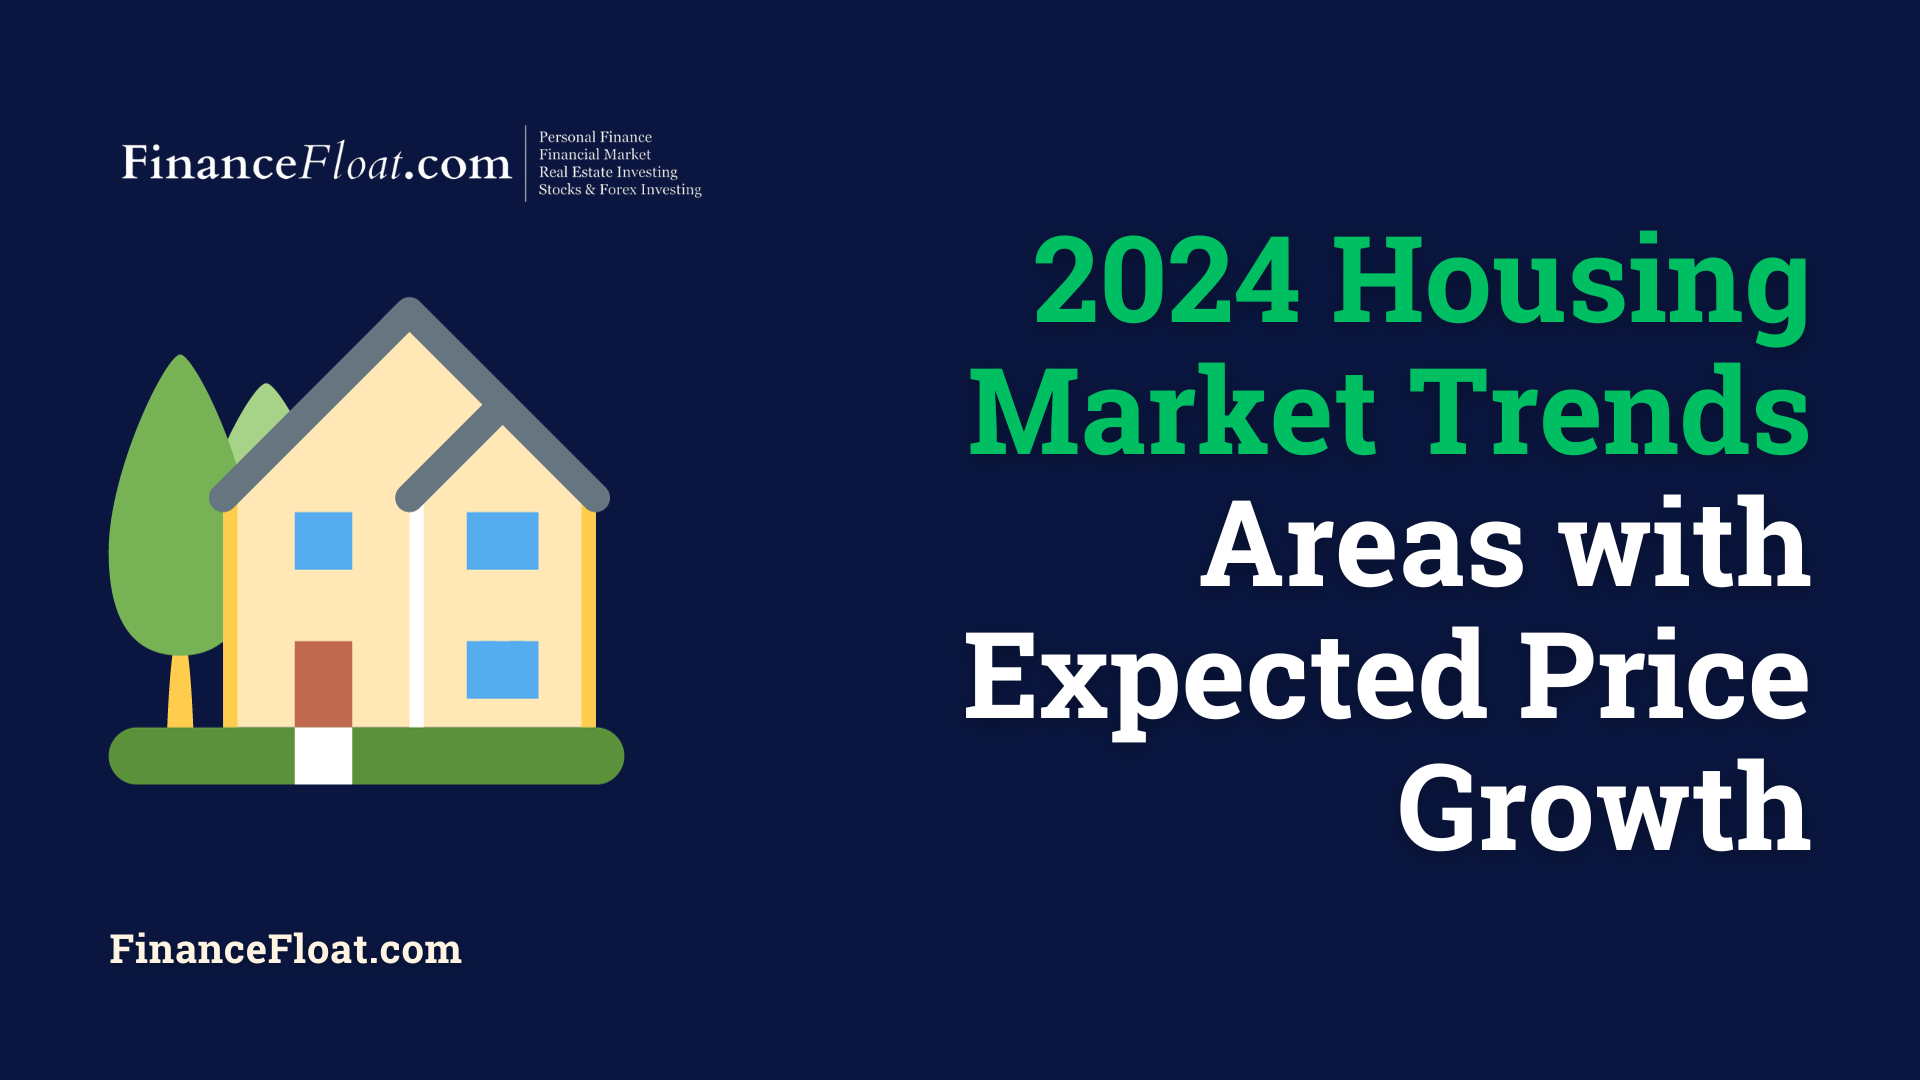 2024 Housing Market Trends Areas with Expected Price Growth